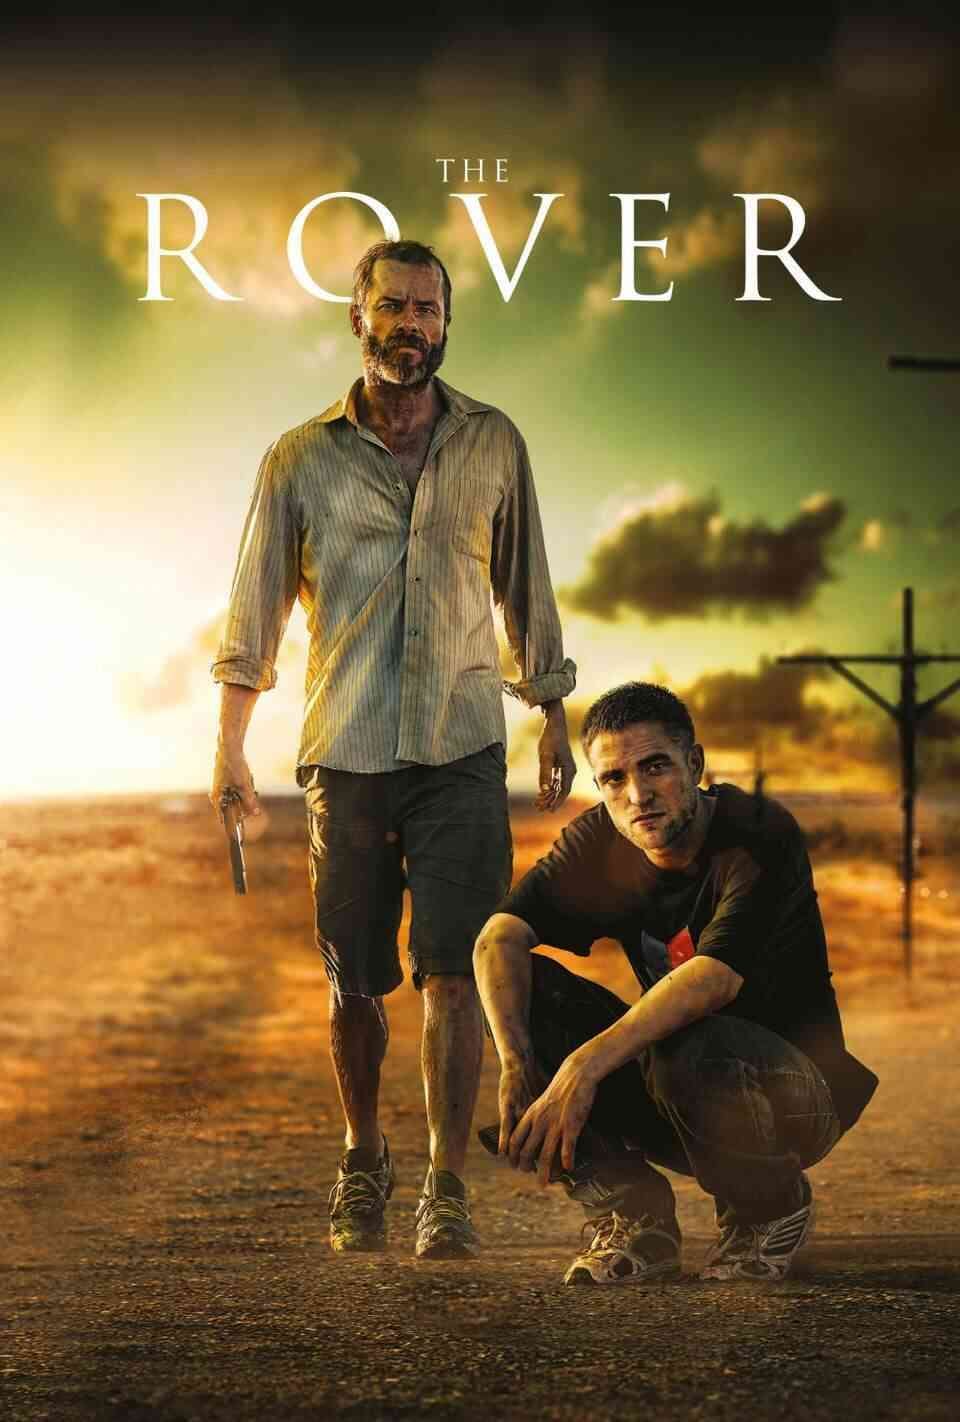 Read The Rover screenplay (poster)